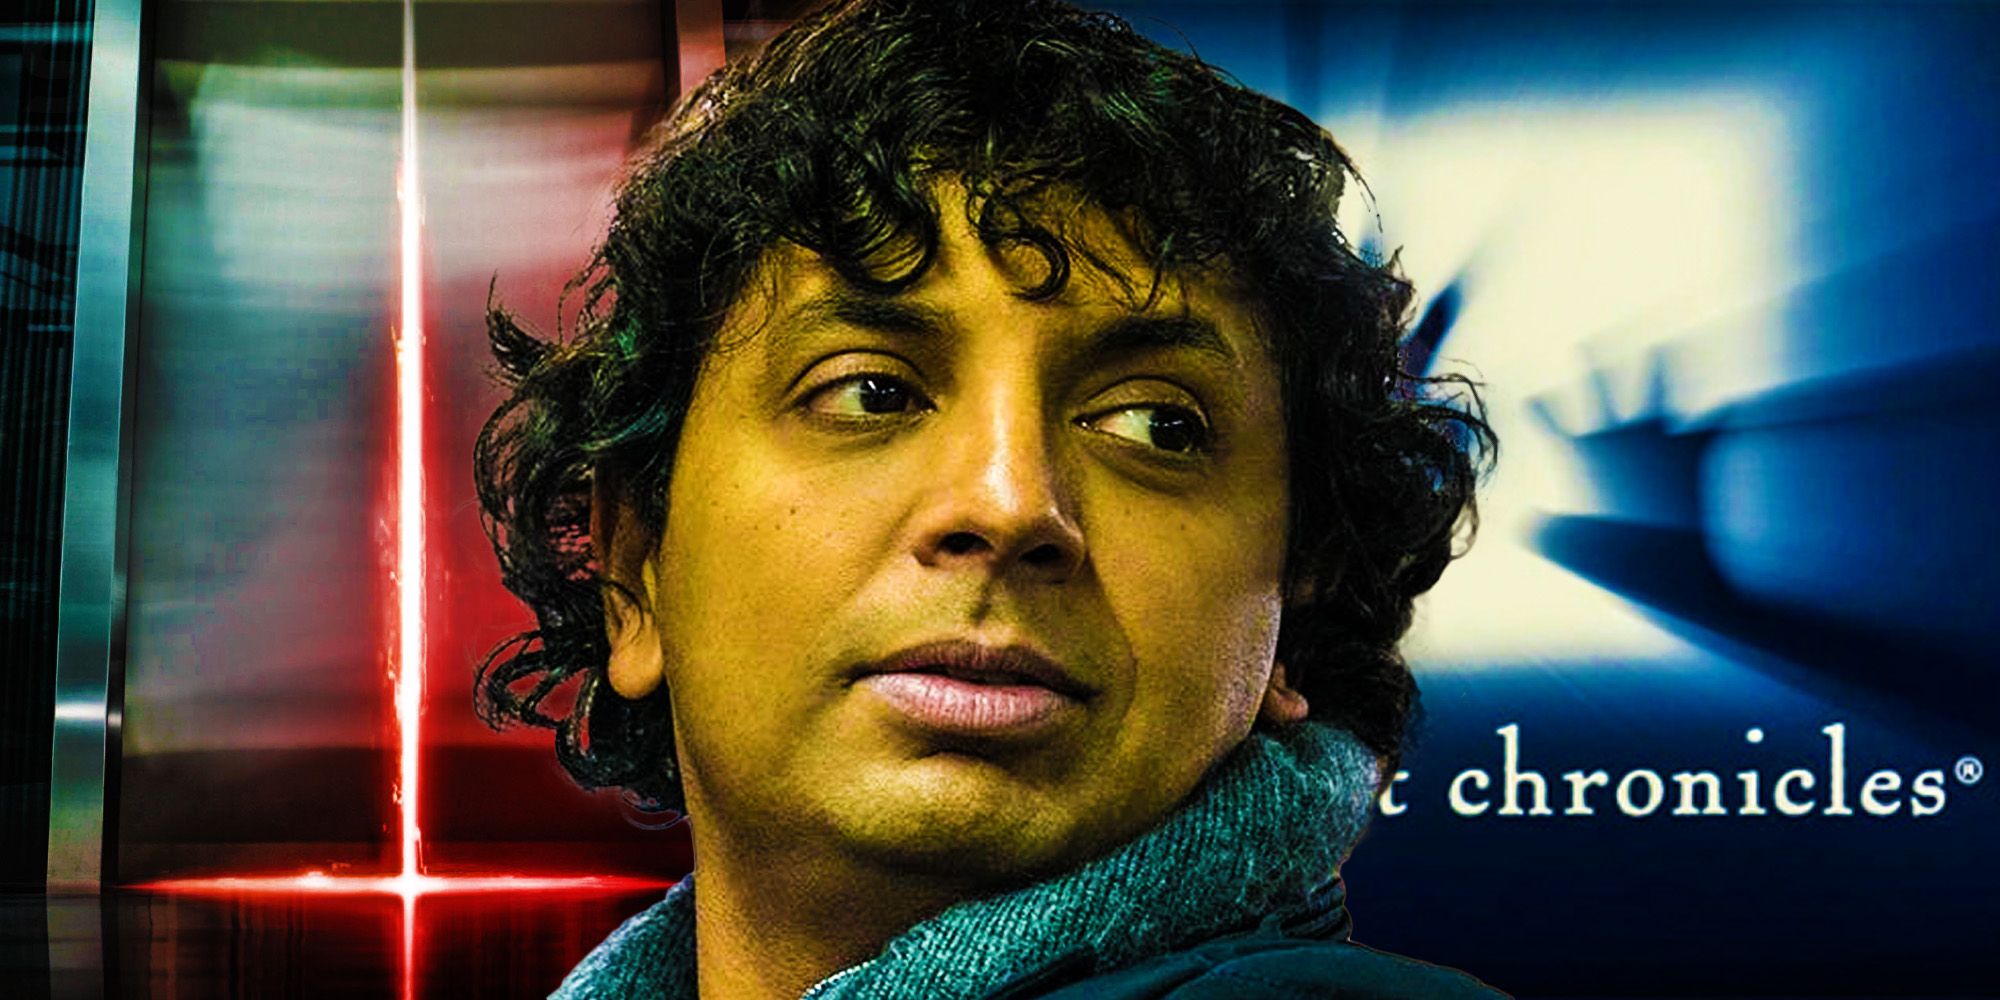 M Night Shyamalan's "Night Chronicles": Why Devil's Sequel Was Cancelled